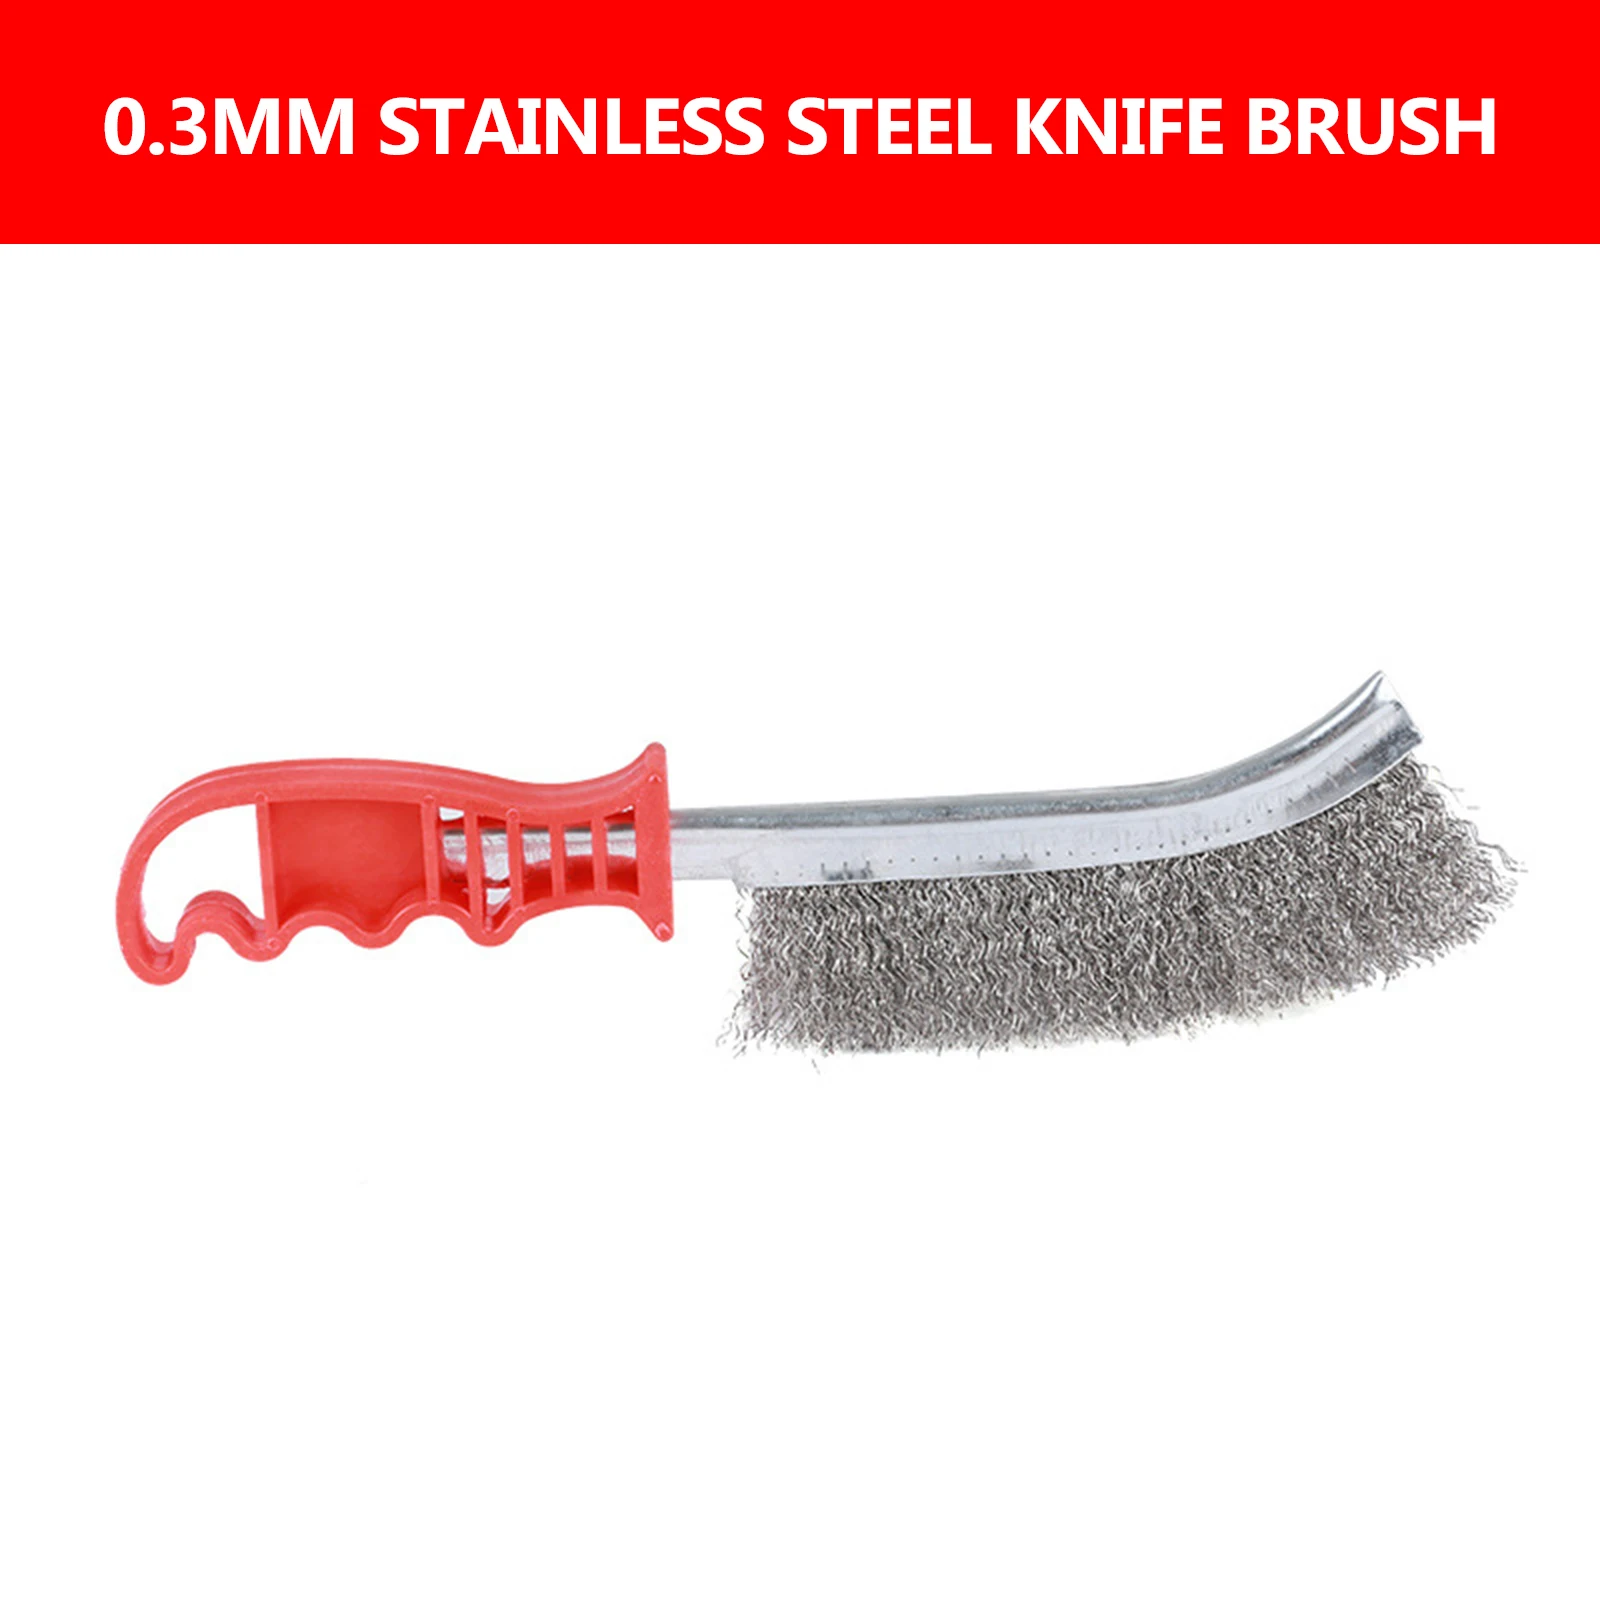 https://ae01.alicdn.com/kf/H256885b94f4243b7bd601e494fe6f38cQ/Steel-Wire-Brush-Barbecue-Cleaning-Stainless-Steel-Wire-Iron-Brush-Small-Steel-Copper-Brush-Derusting-Brushsteel.jpeg